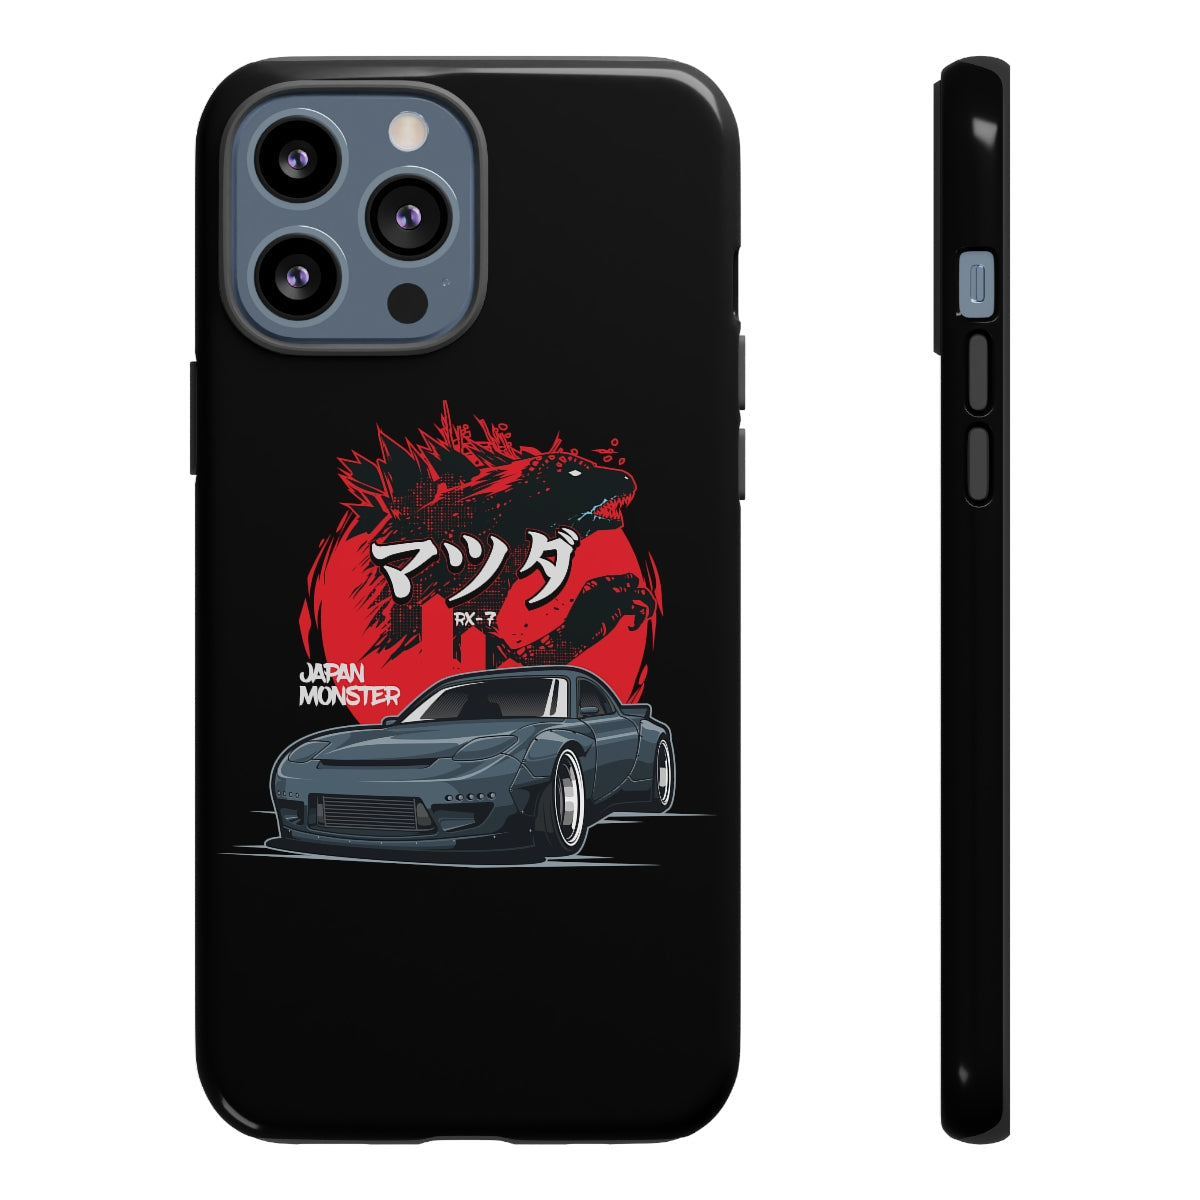 Mazda RX-7 Japan Monster - Car Phone Case - iPhone 13 Pro Max